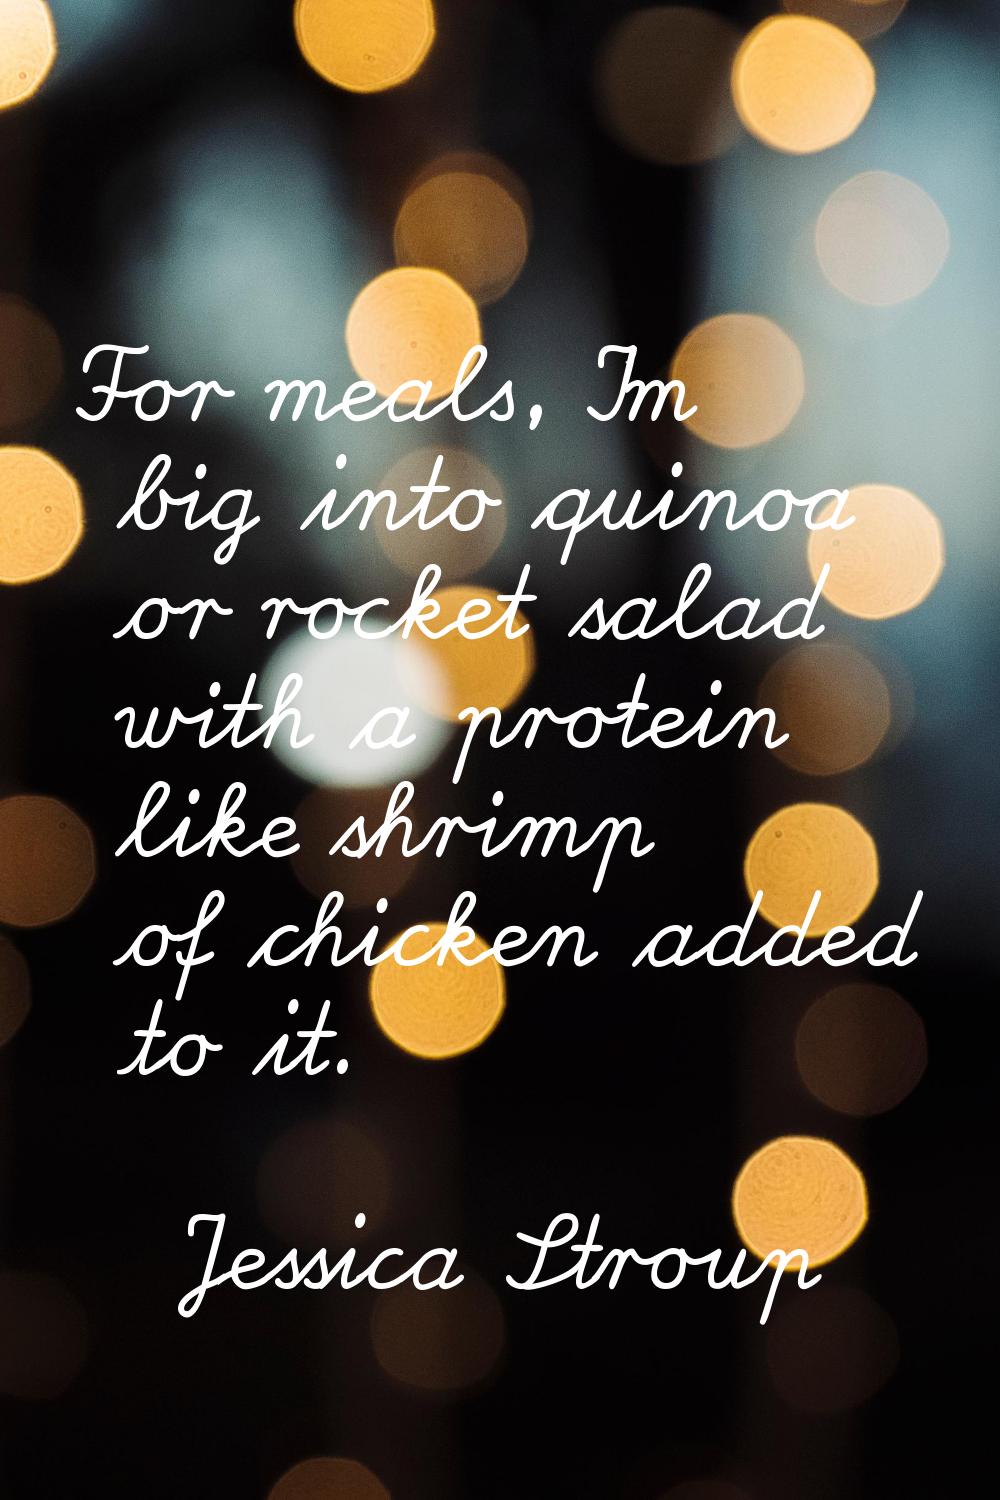 For meals, I'm big into quinoa or rocket salad with a protein like shrimp of chicken added to it.